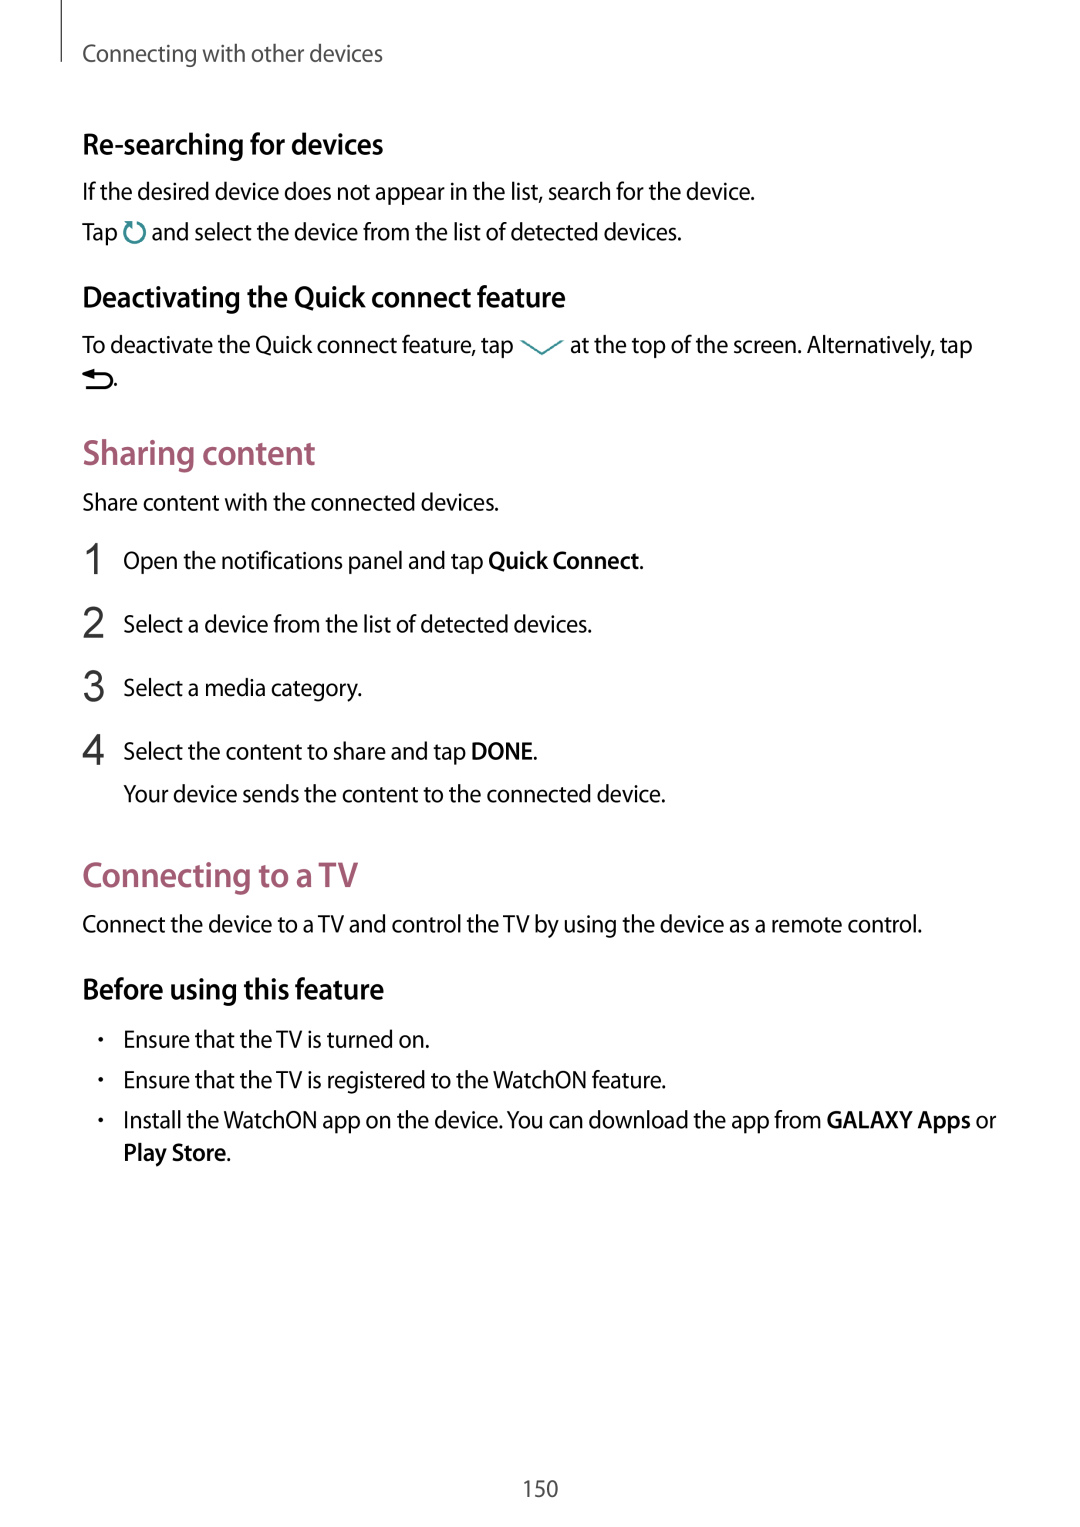 Samsung SM-G901FZKADBT manual Sharing content, Connecting to a TV, Re-searching for devices, Before using this feature 